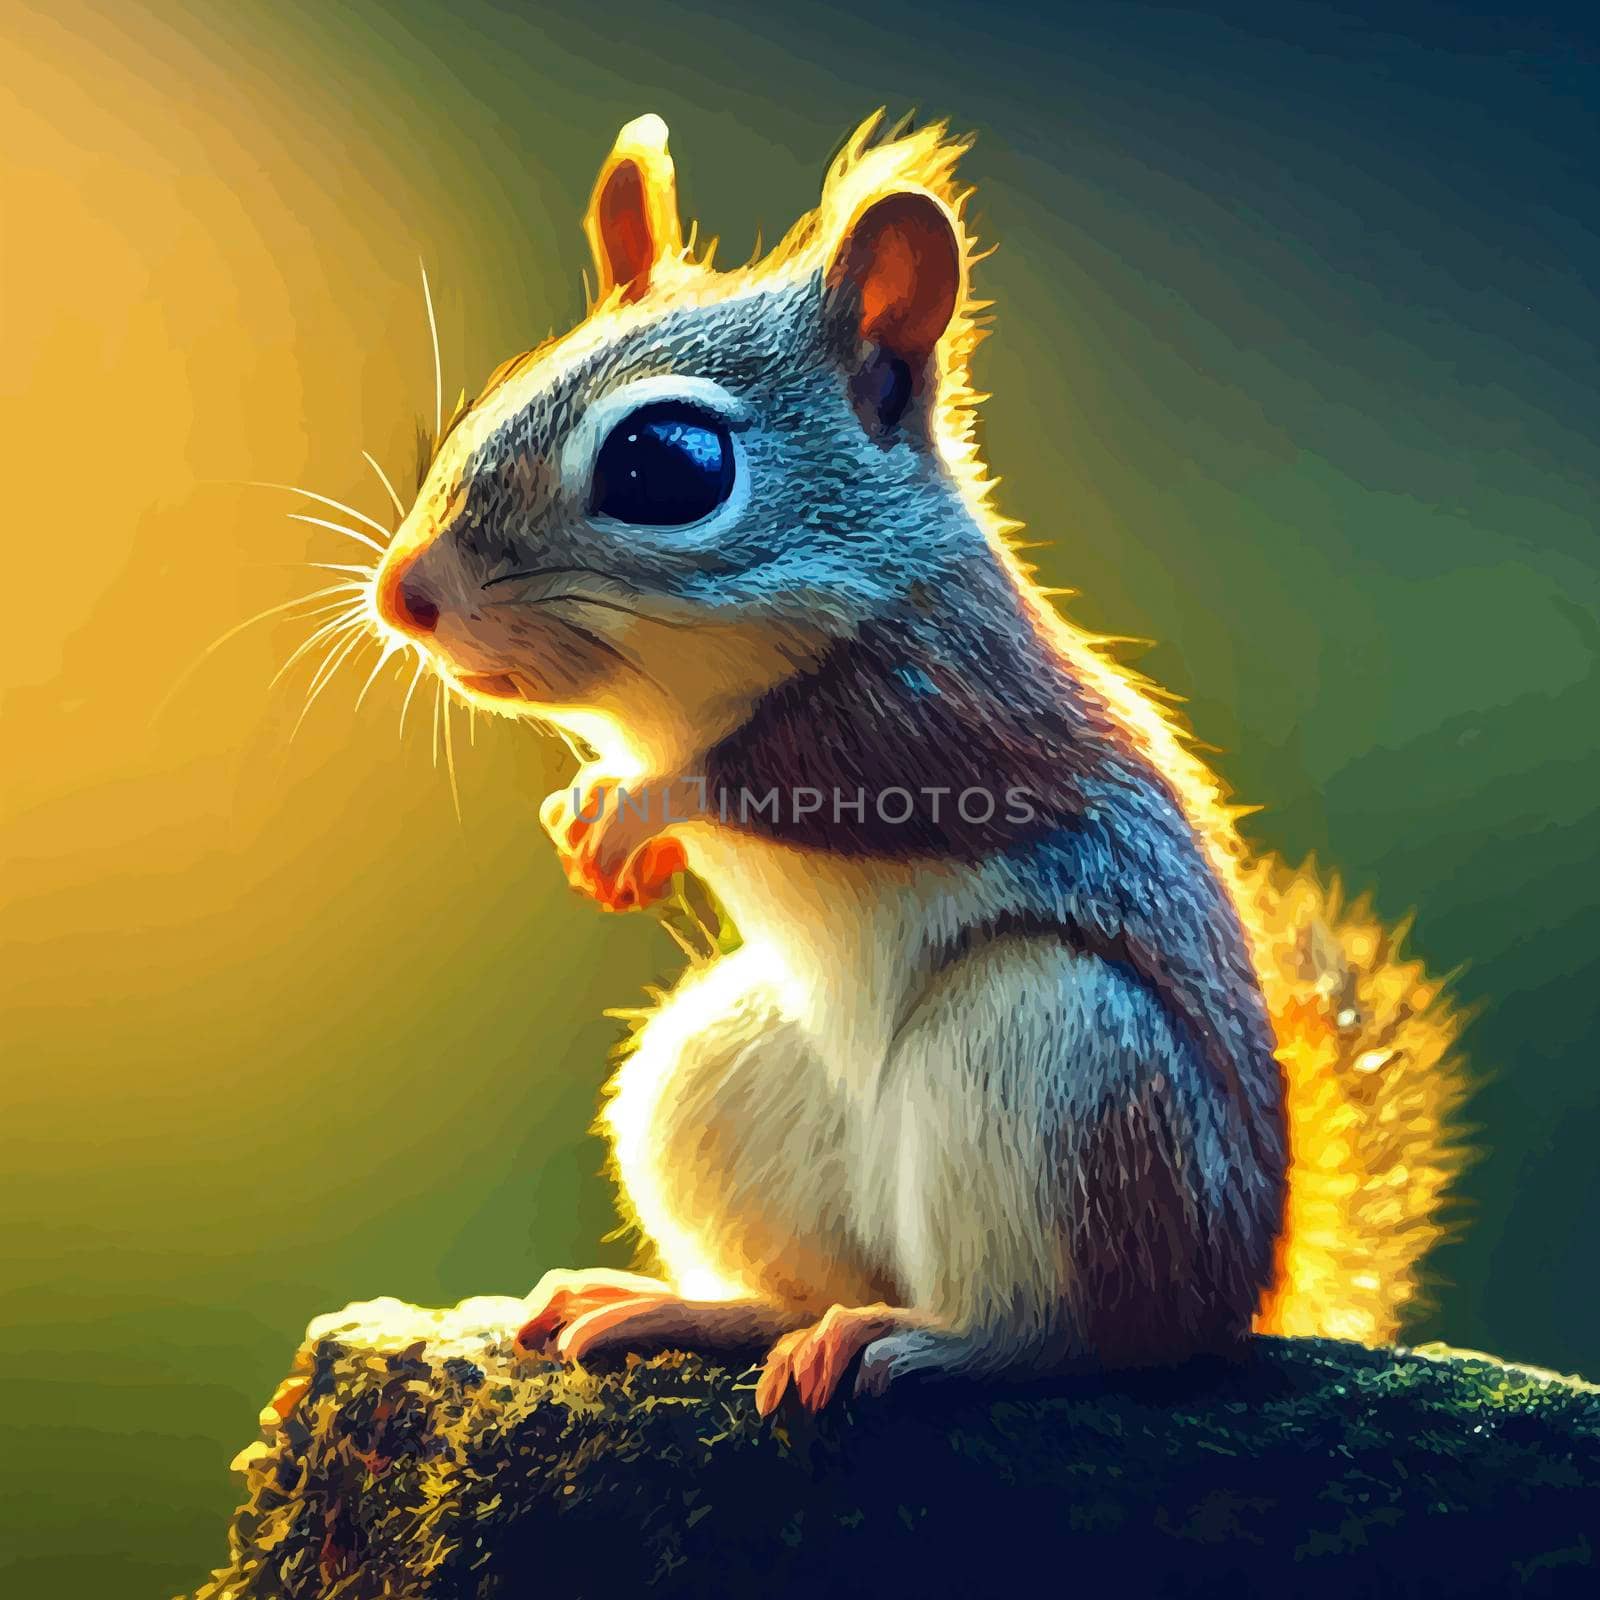 animated illustration of a cute squirrel, animated squirrel portrait by JpRamos